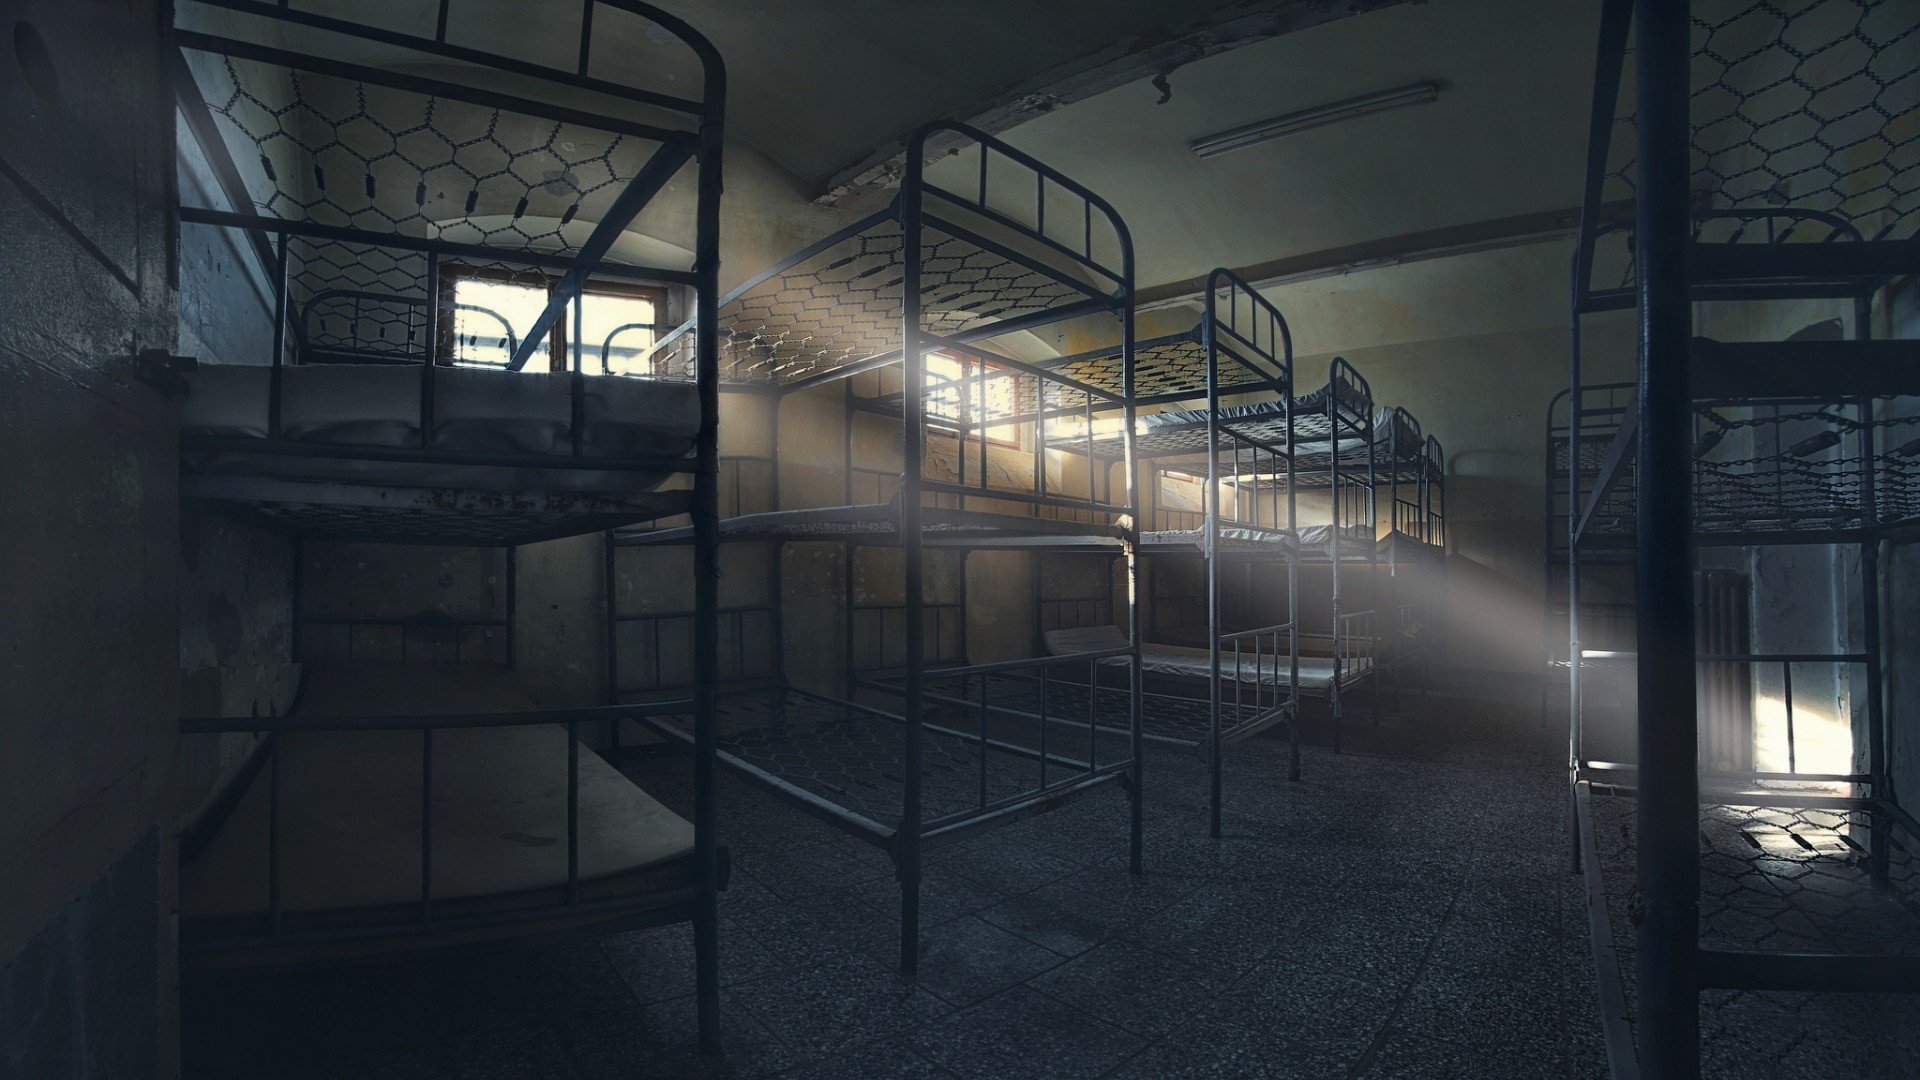 architecture, Interiors, Abandoned, Silent, Bunk bed, Sun rays, Bed, Empty, Mattresses, Dust Wallpaper